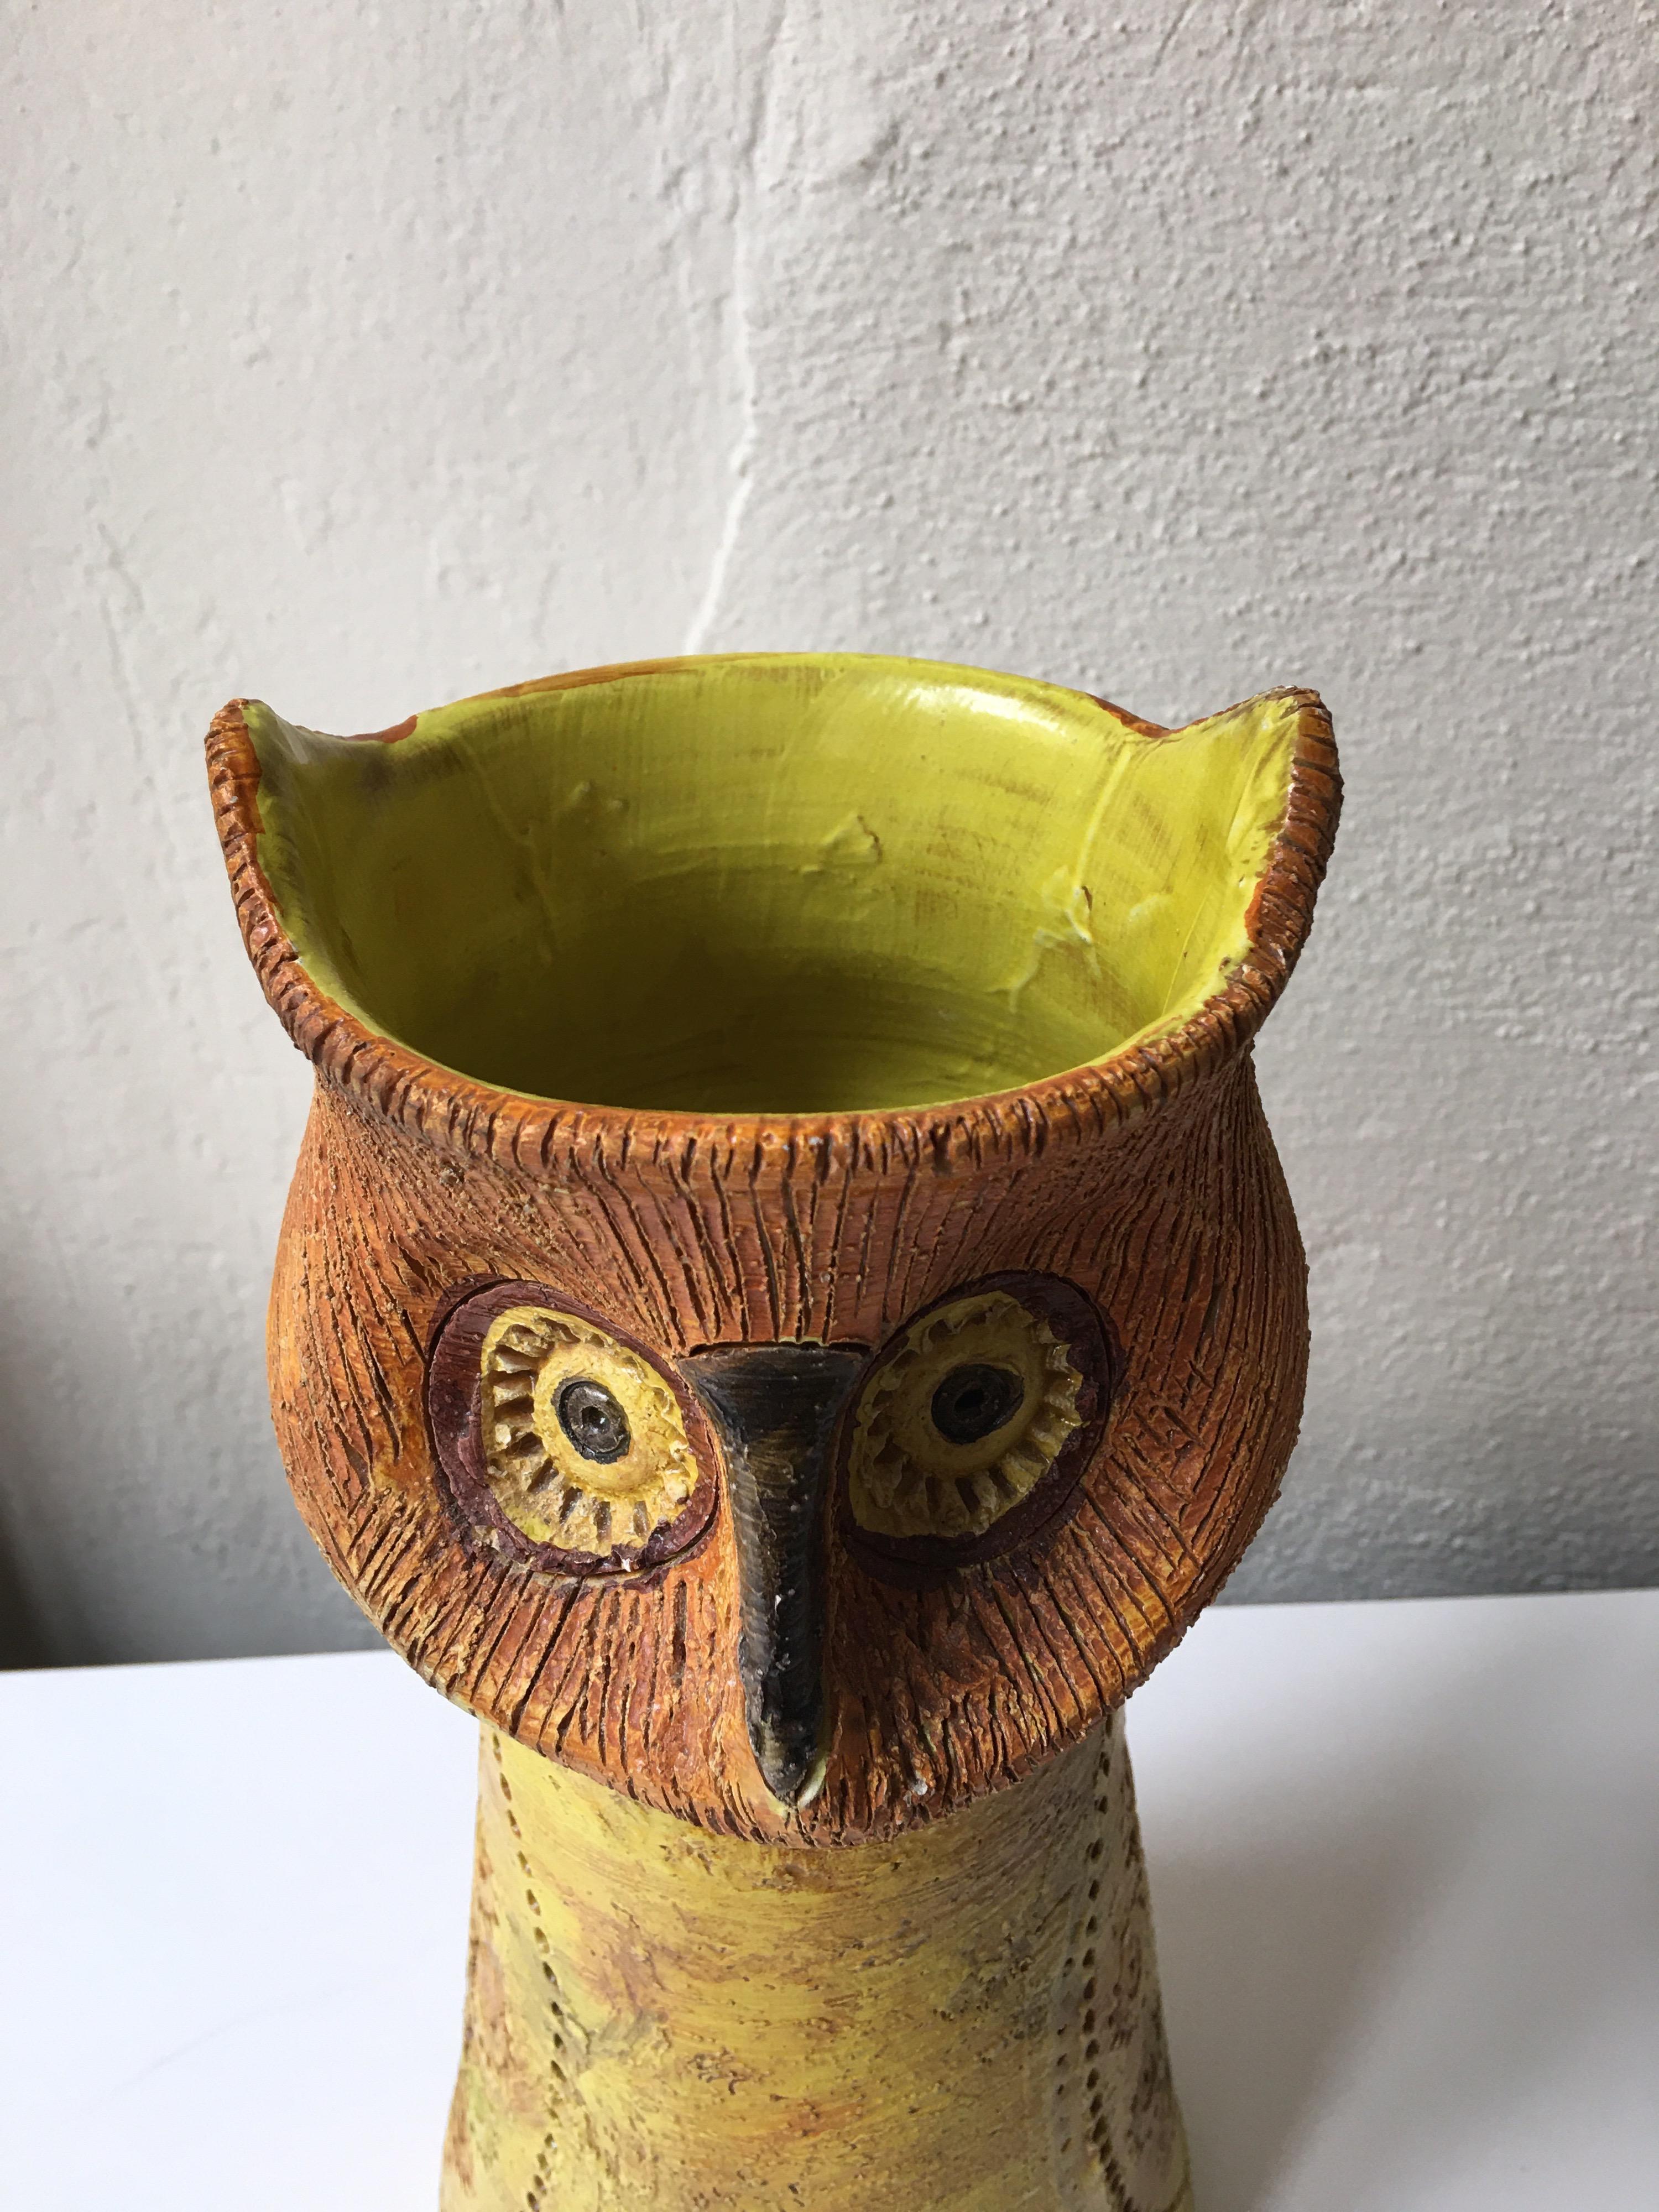 Aldo Londi for Bitossi yellow owl vase. Imported by Rosenthal Netter. Nice size and useful! Fully functioning Vase! Nice to find in the yellow glaze instead of the blue!